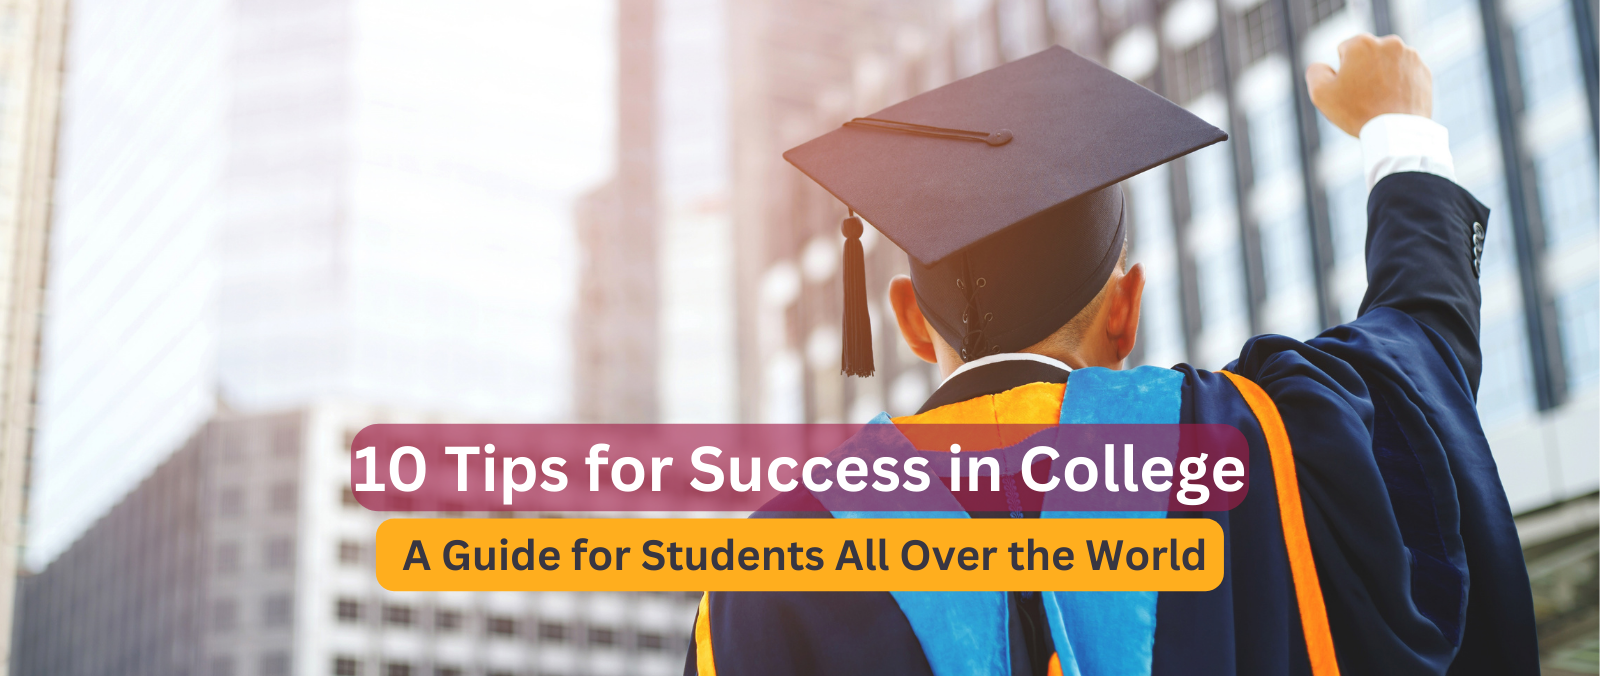 10 Tips for Success in College